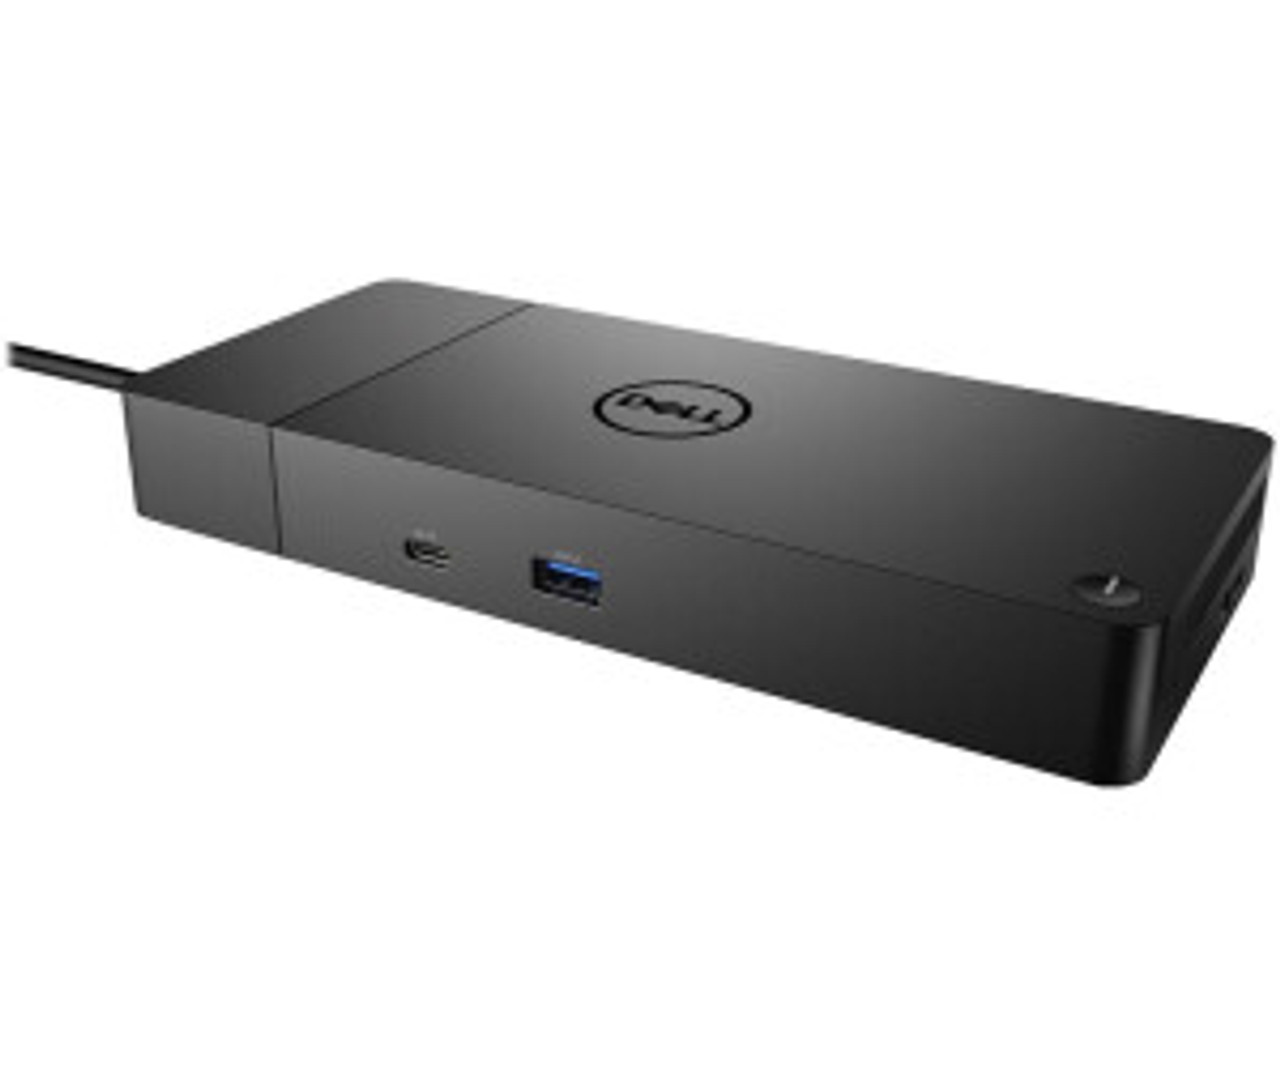 Dell 130W Laptop Computer Docking Station - DELL-WD19S130W